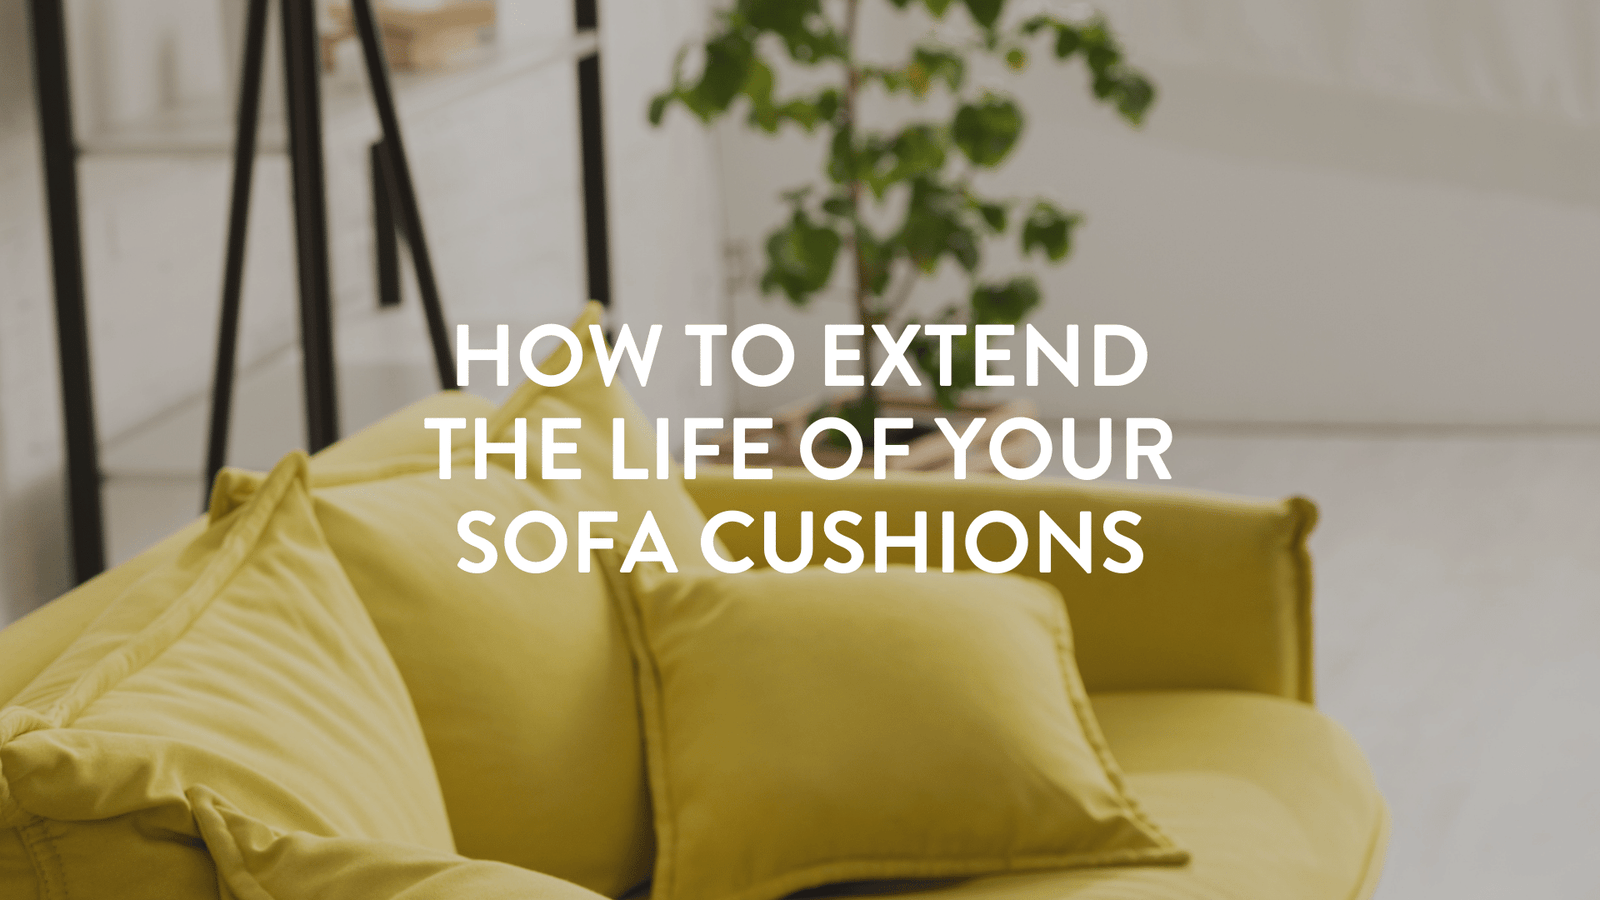 https://putnams.co.uk/cdn/shop/articles/HOW_TO_EXTEND_THE_LIFE_OF_YOUR_SOFA_CUSHIONS.-3.png?v=1643803598&width=1600